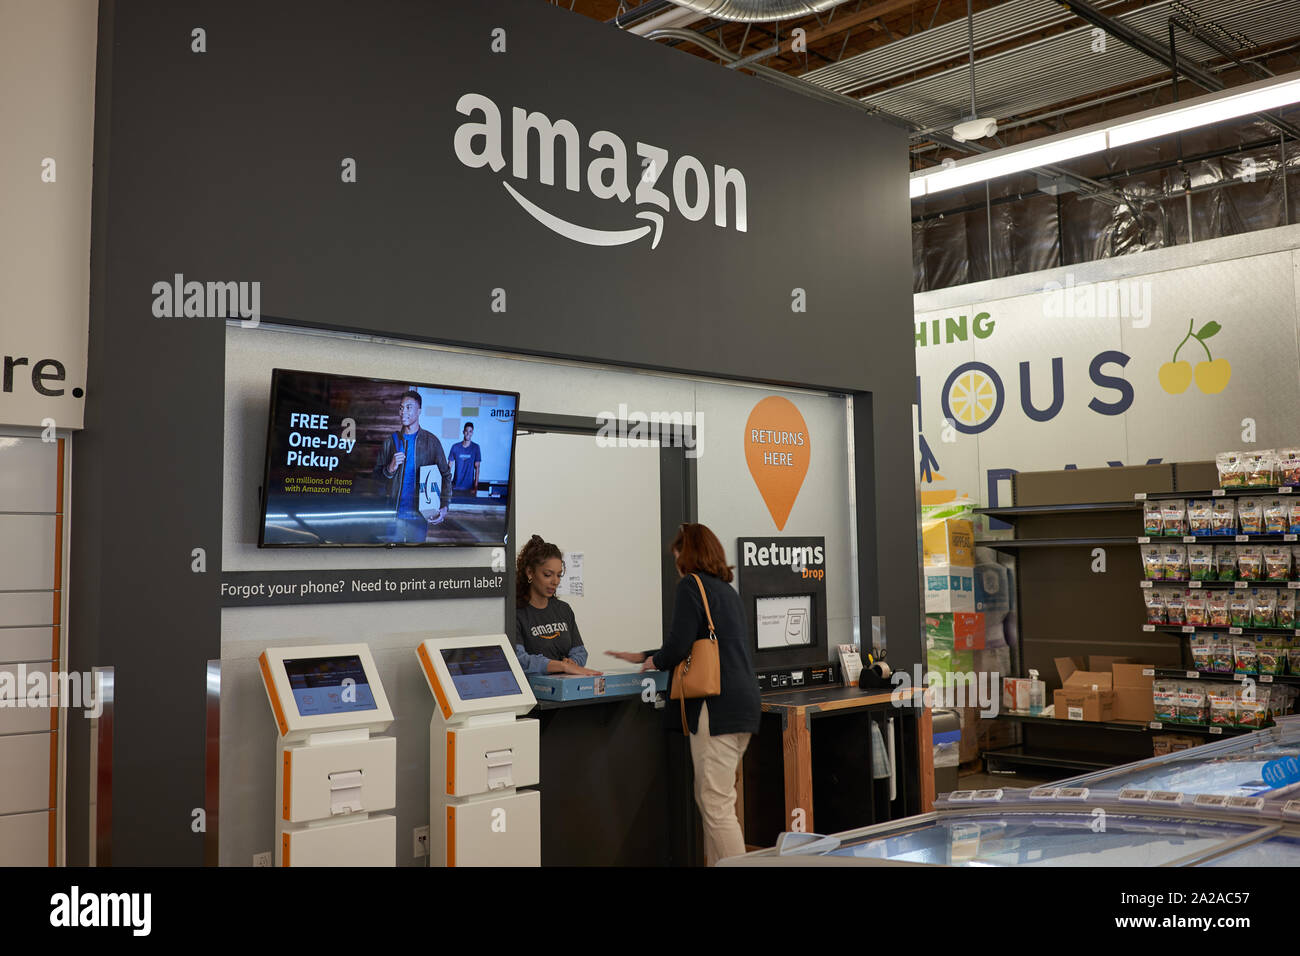 A customer returns a package at an Amazon Locker location in a Whole Foods Market grocery store in Lake Oswego, Oregon, on Friday, Sep 13, 2019. Stock Photo